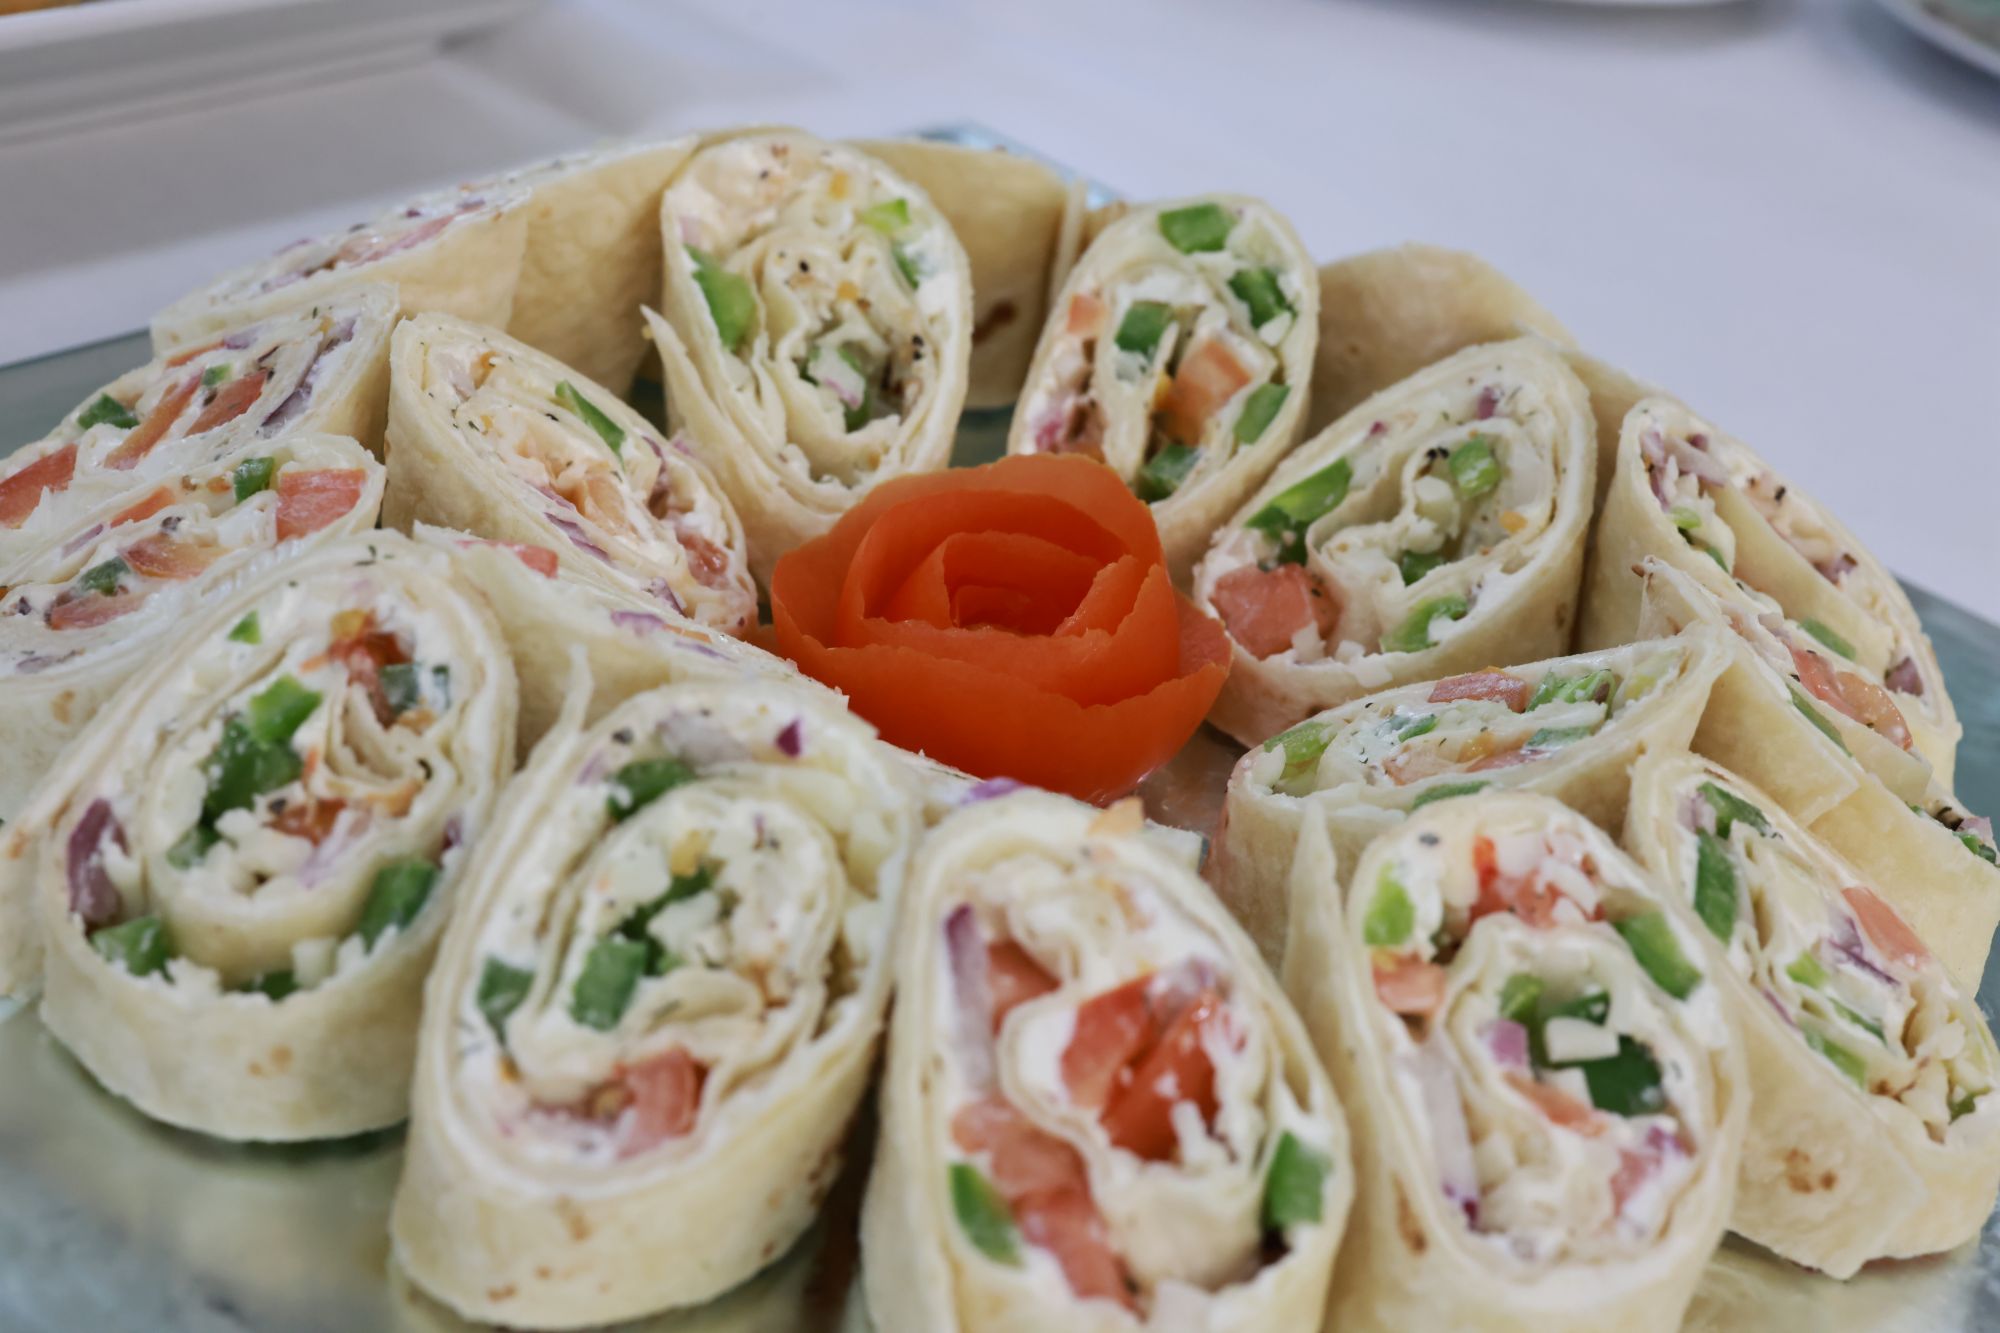 This is a platter with a rose surrounded by sandwich wraps